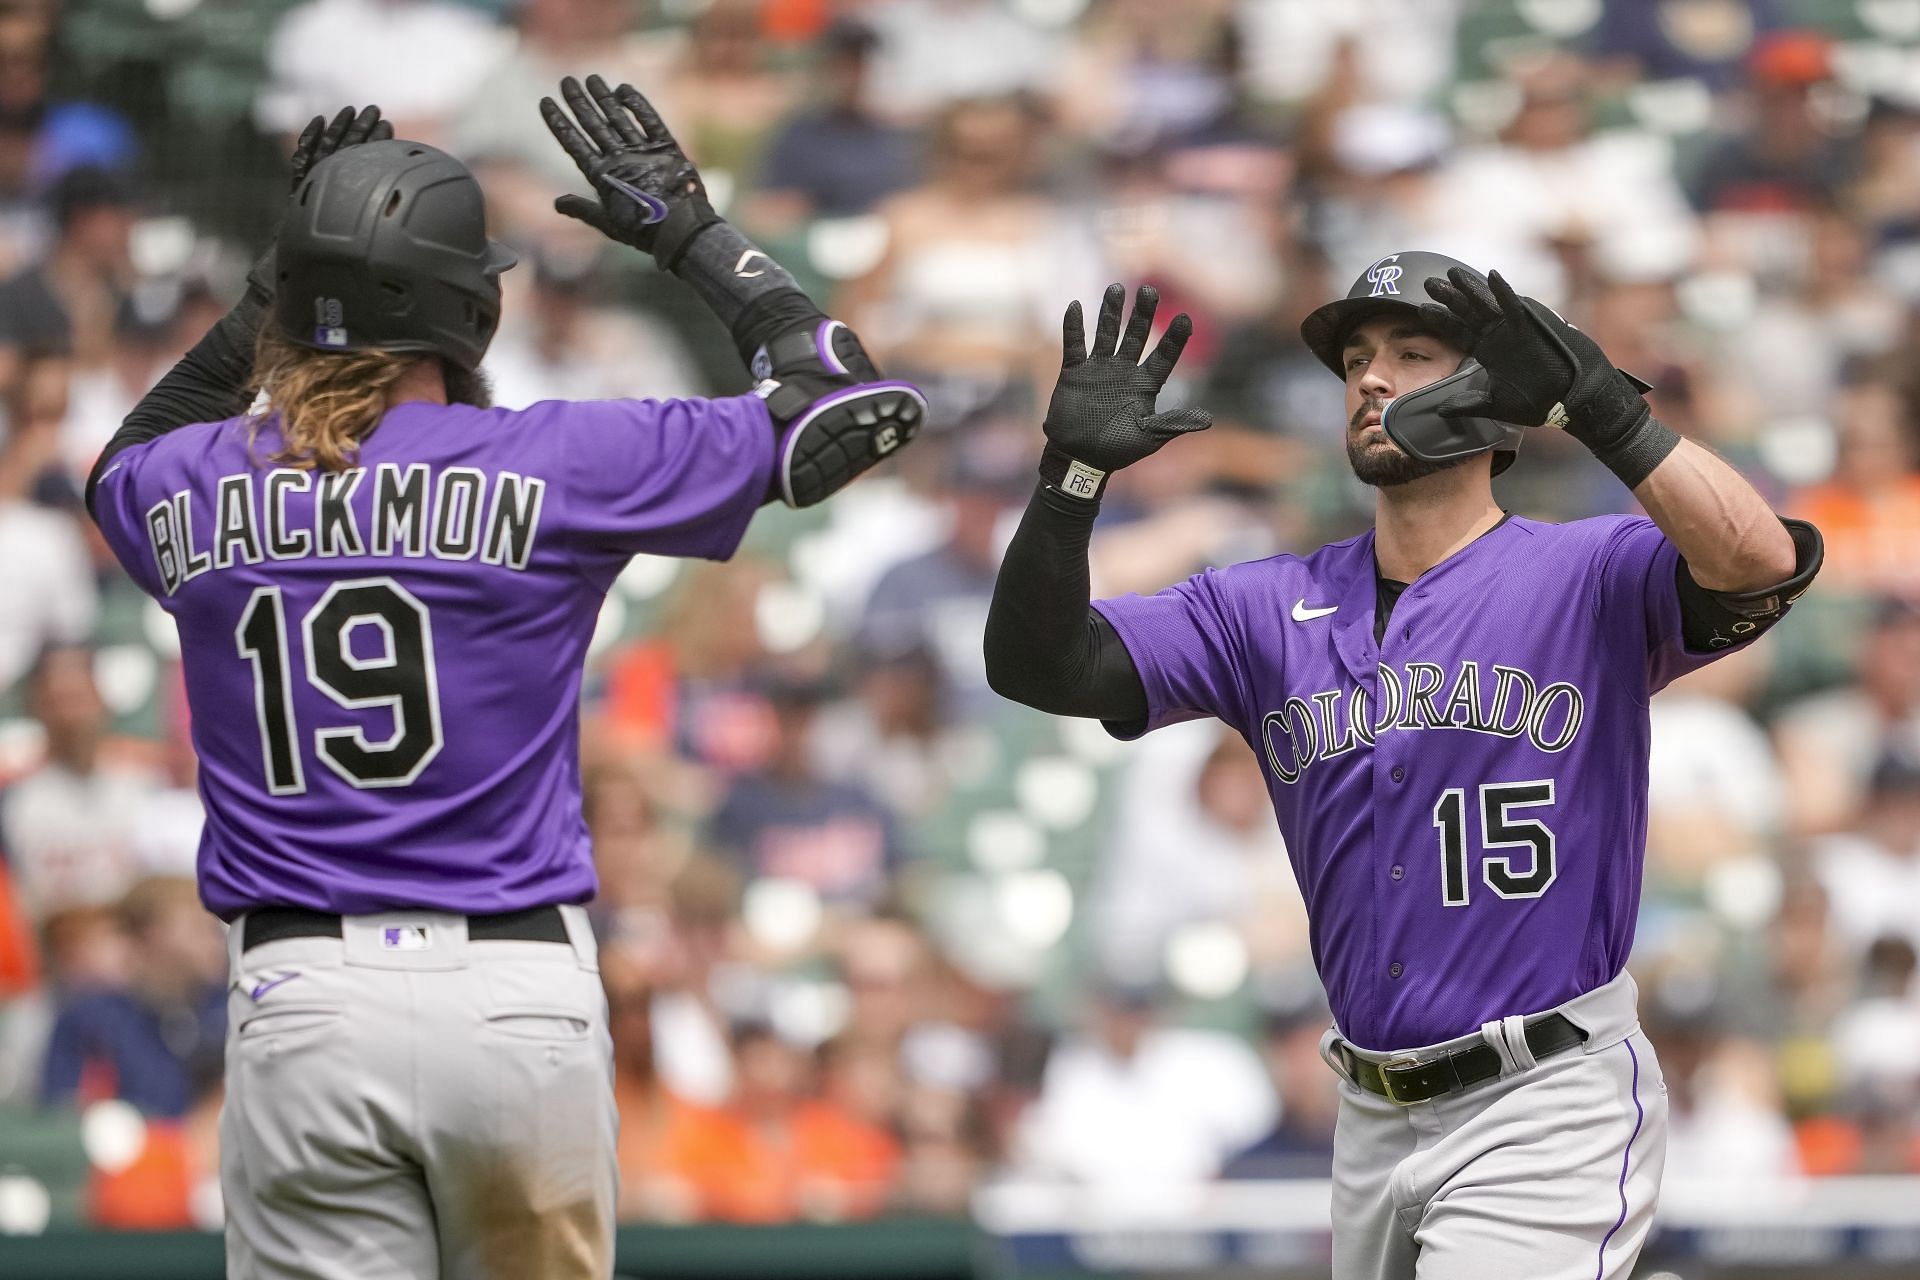 Randal Grichuk of the Colorado Rockies celebrates hitting a home run with Charlie Blackmon.